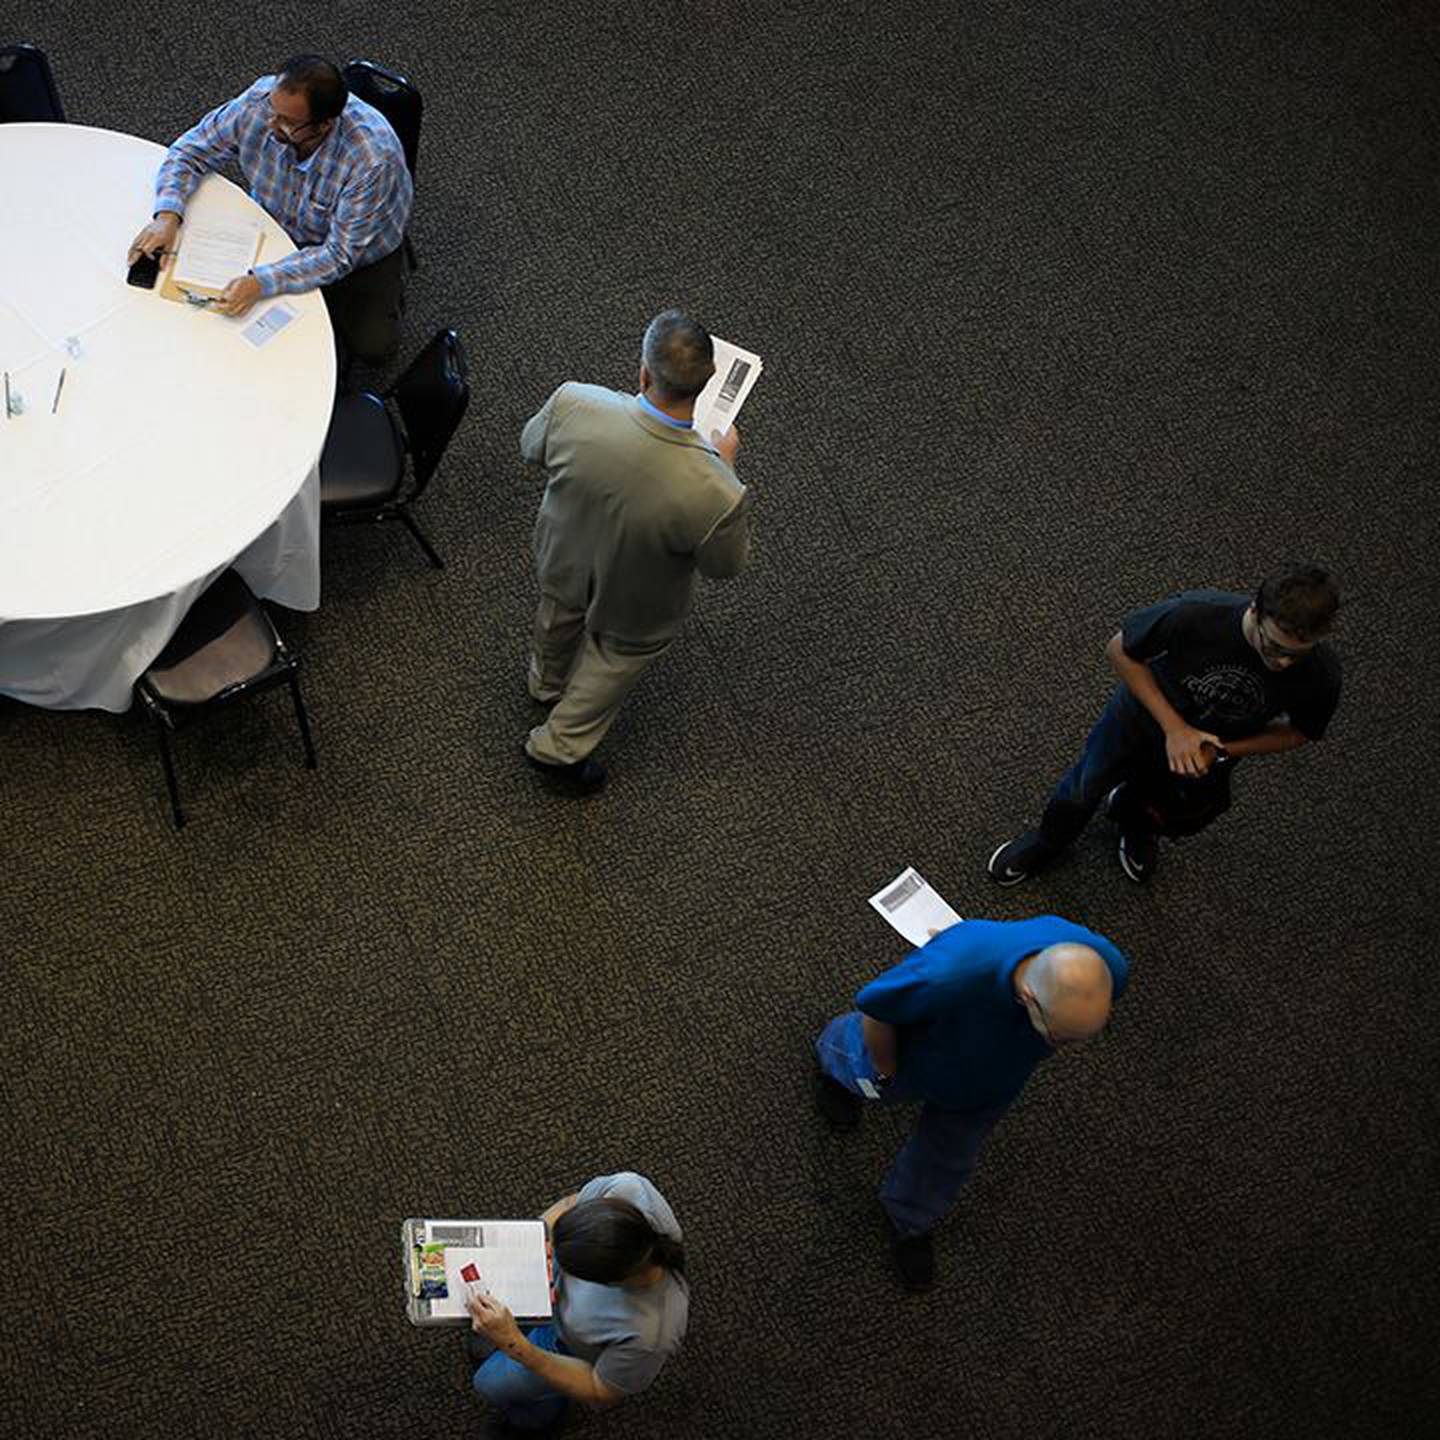 Job seekers attend a Job News USA career fair in Louisville, Kentucky, U.S., on Wednesday, June 23, 2021. The Department of Labor is scheduled to release initial jobless claims figures on June 24. Photographer: Luke Sharrett/Bloomberg